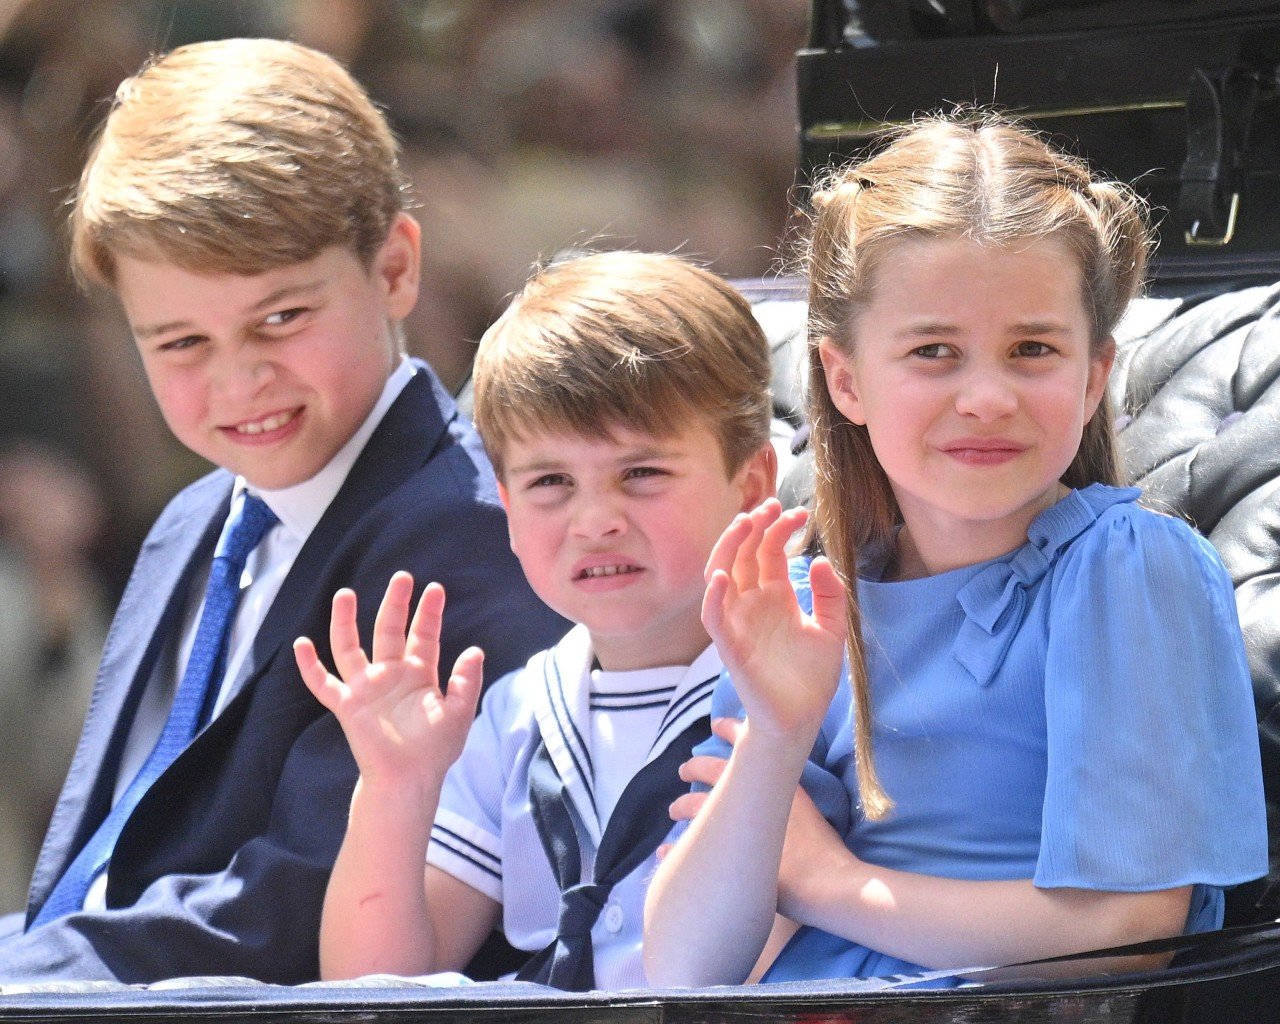 Prince George, Prince Louis, and Princess Charlotte sit together during a royal engagement.